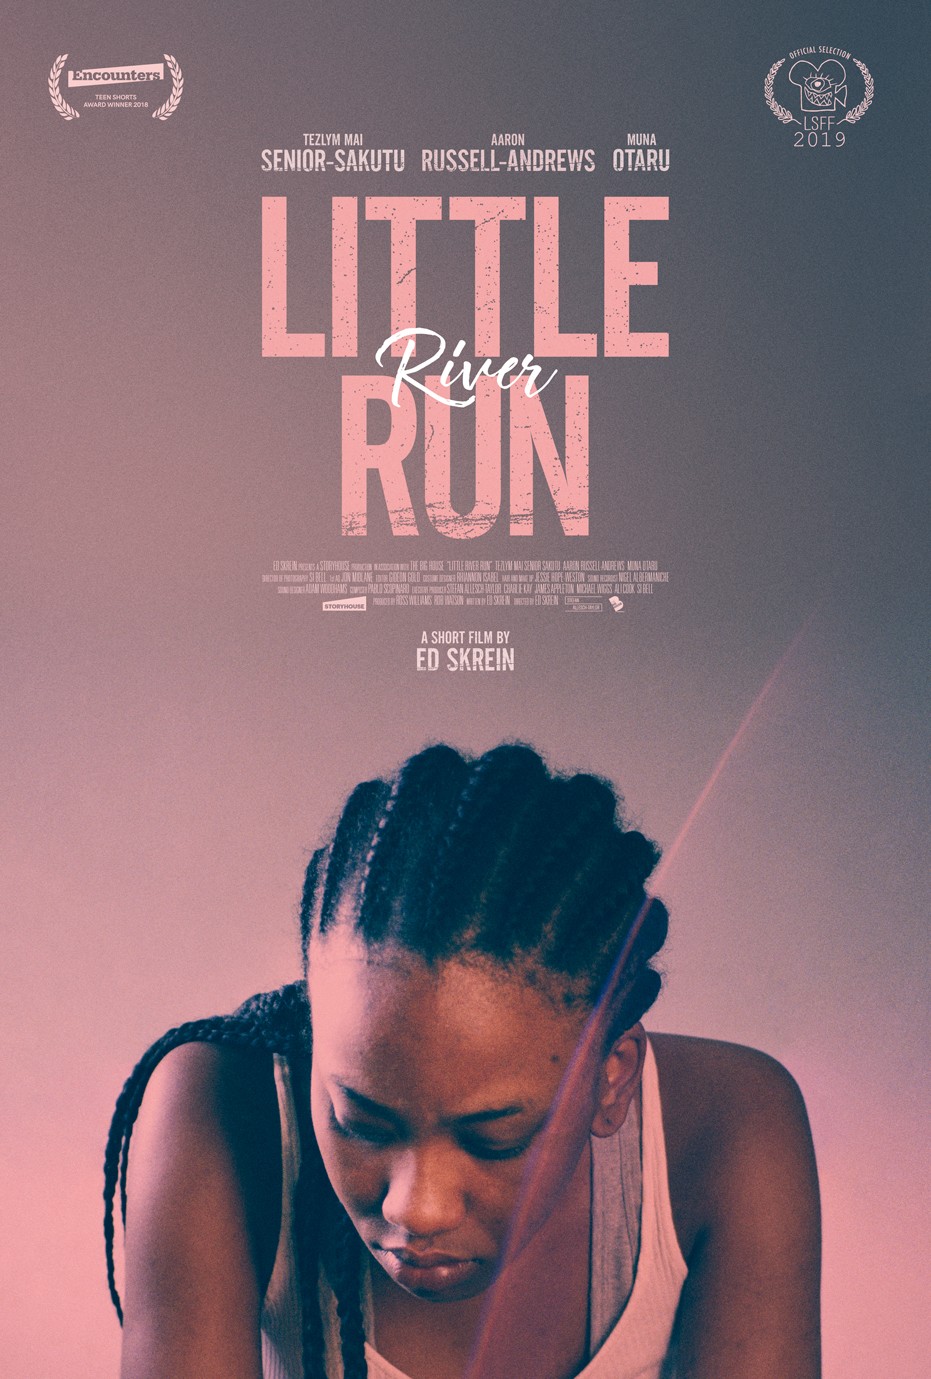 Extra Large Movie Poster Image for Little River Run